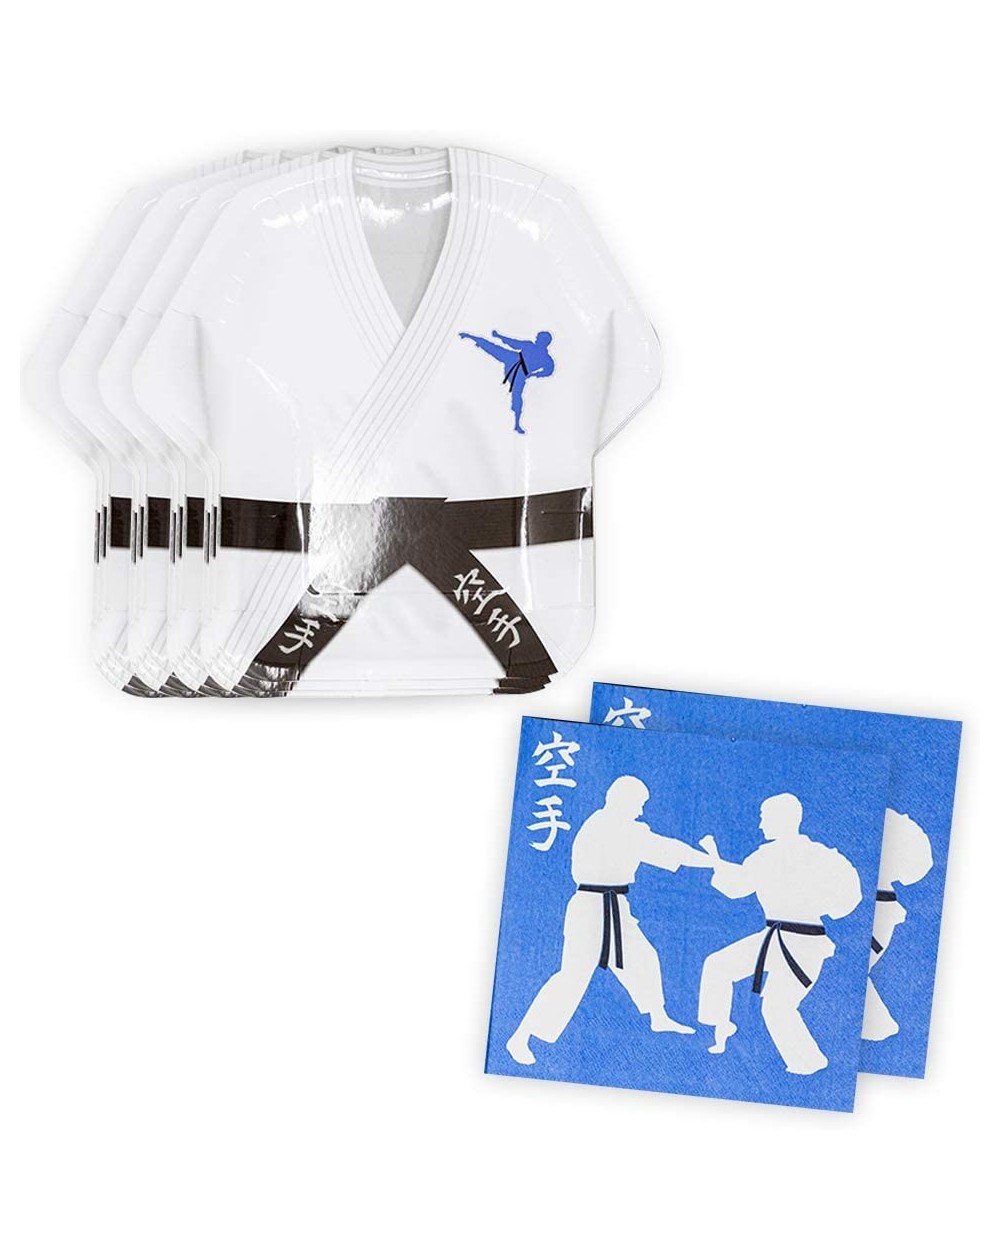 Tableware Karate Shaped Plate & Napkin Sets (70+ Pieces for 32 Guests!)- Karate Party Supplies- Martial Arts Birthday Decorat...